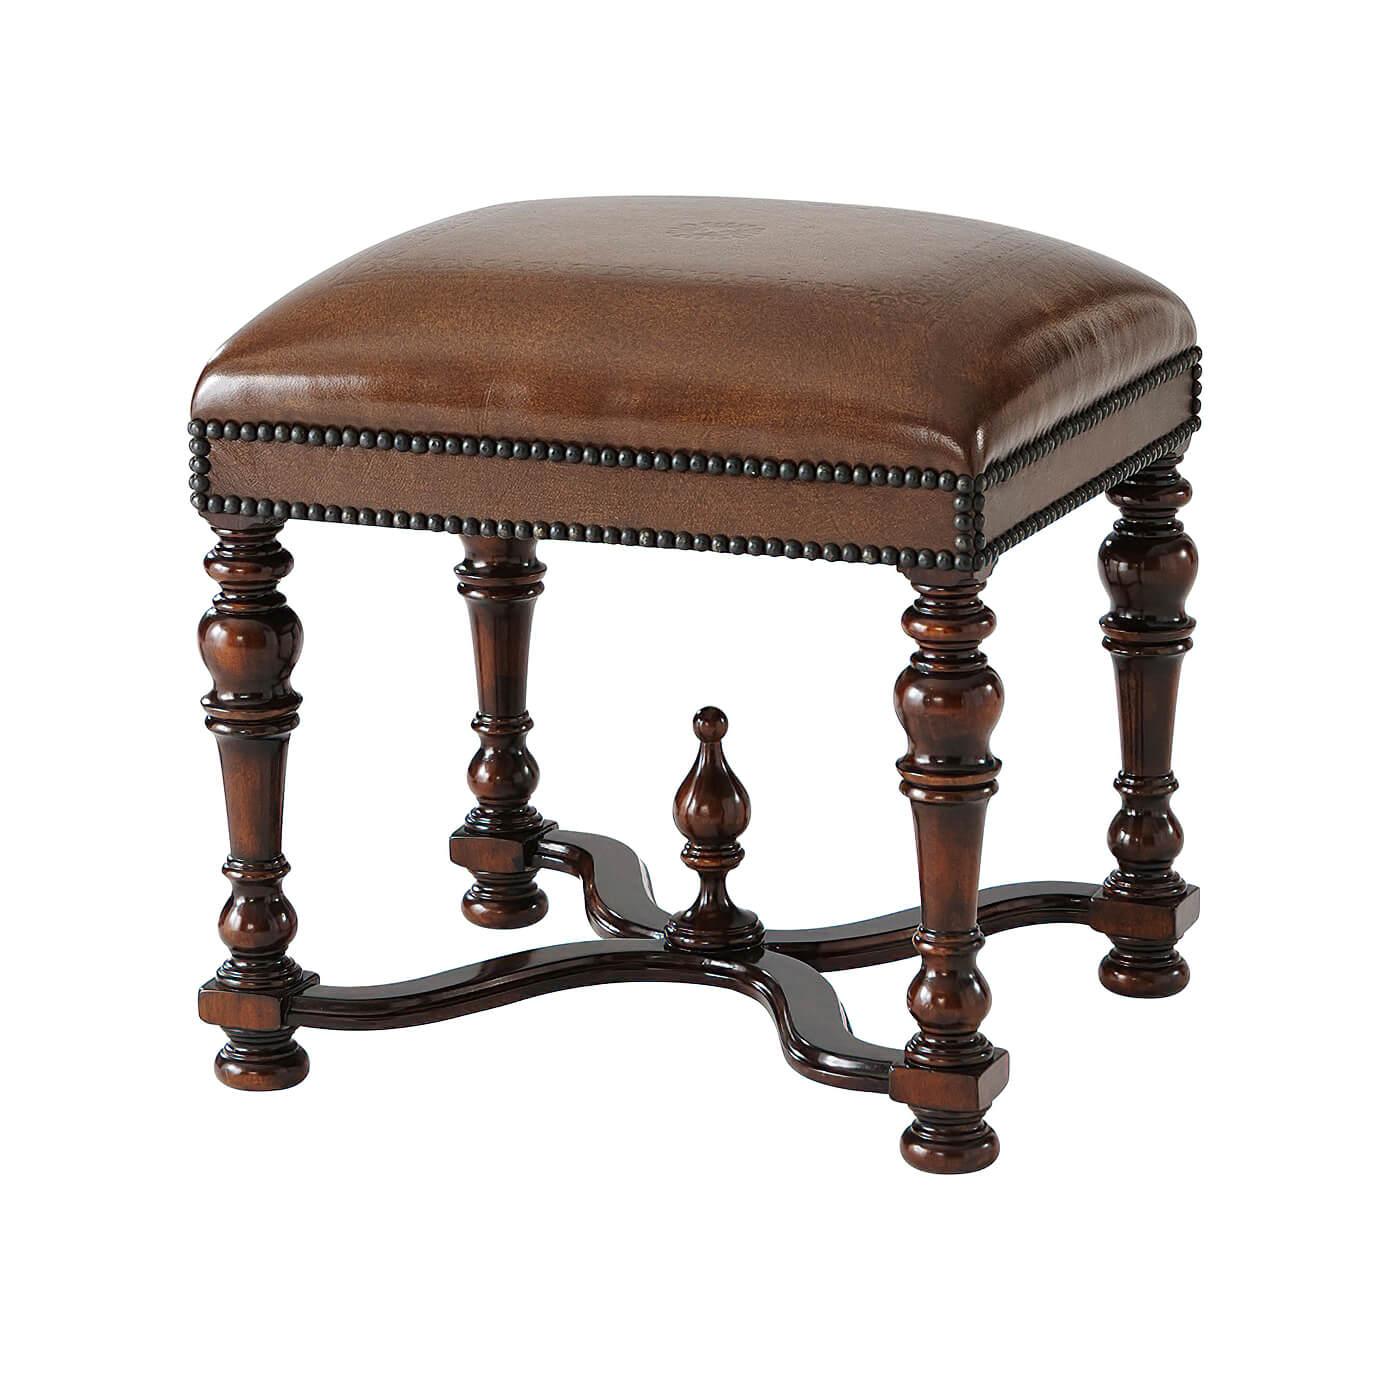 A William and Mary style hand carved stool with a tooled leather upholstered seat, studded decoration, on turned legs, and wavy 